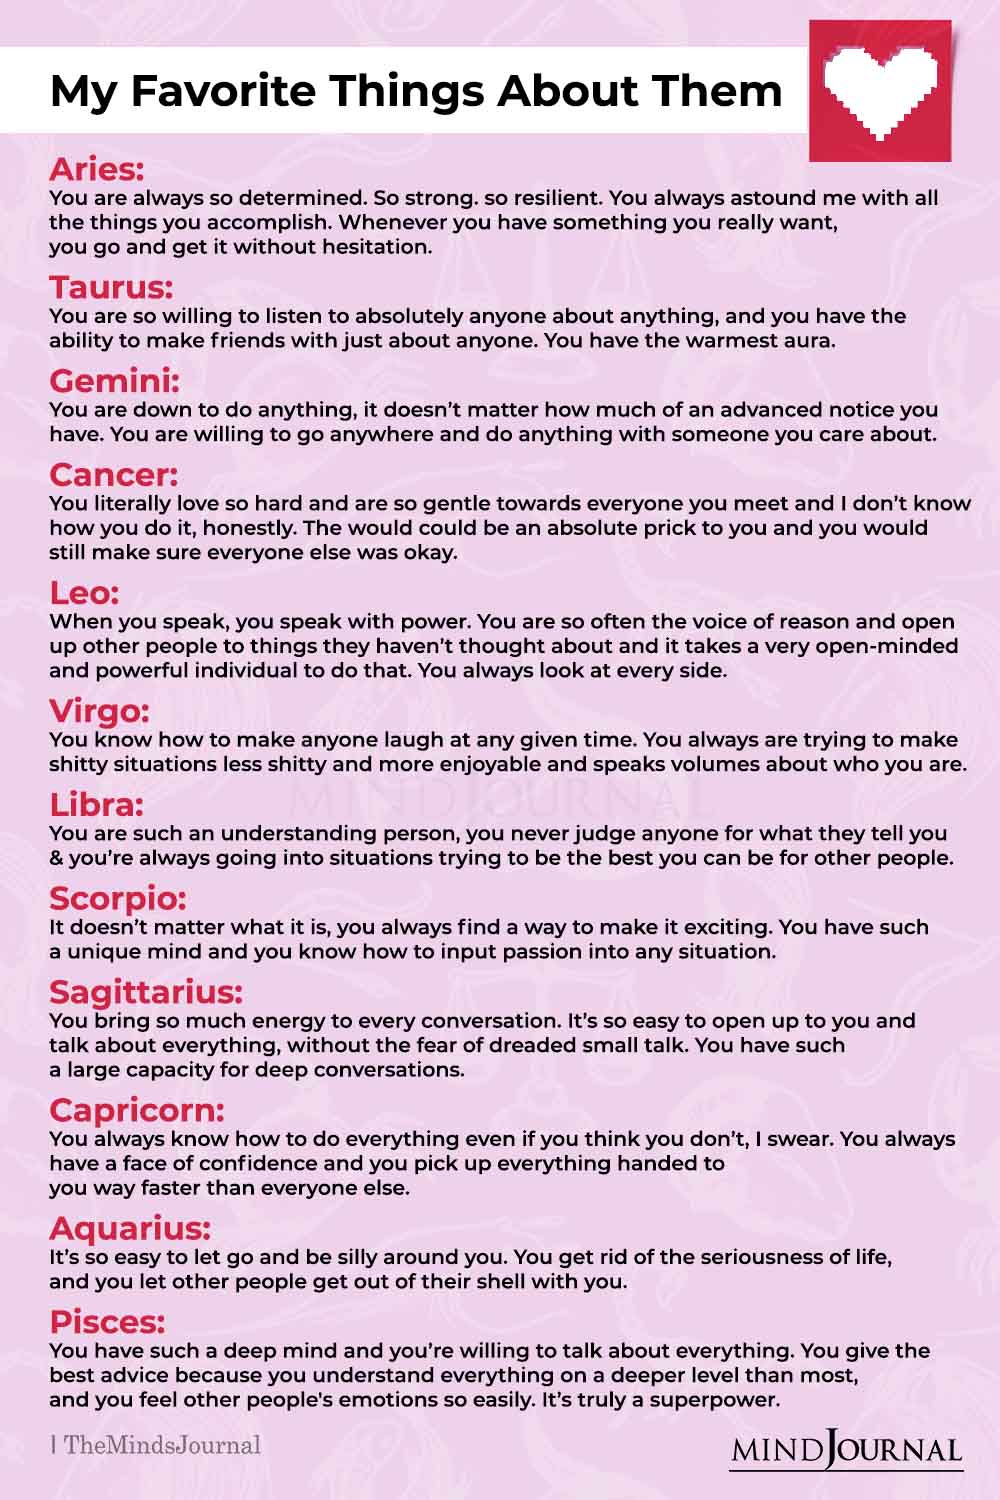 My Favorite Things About The Zodiac Signs